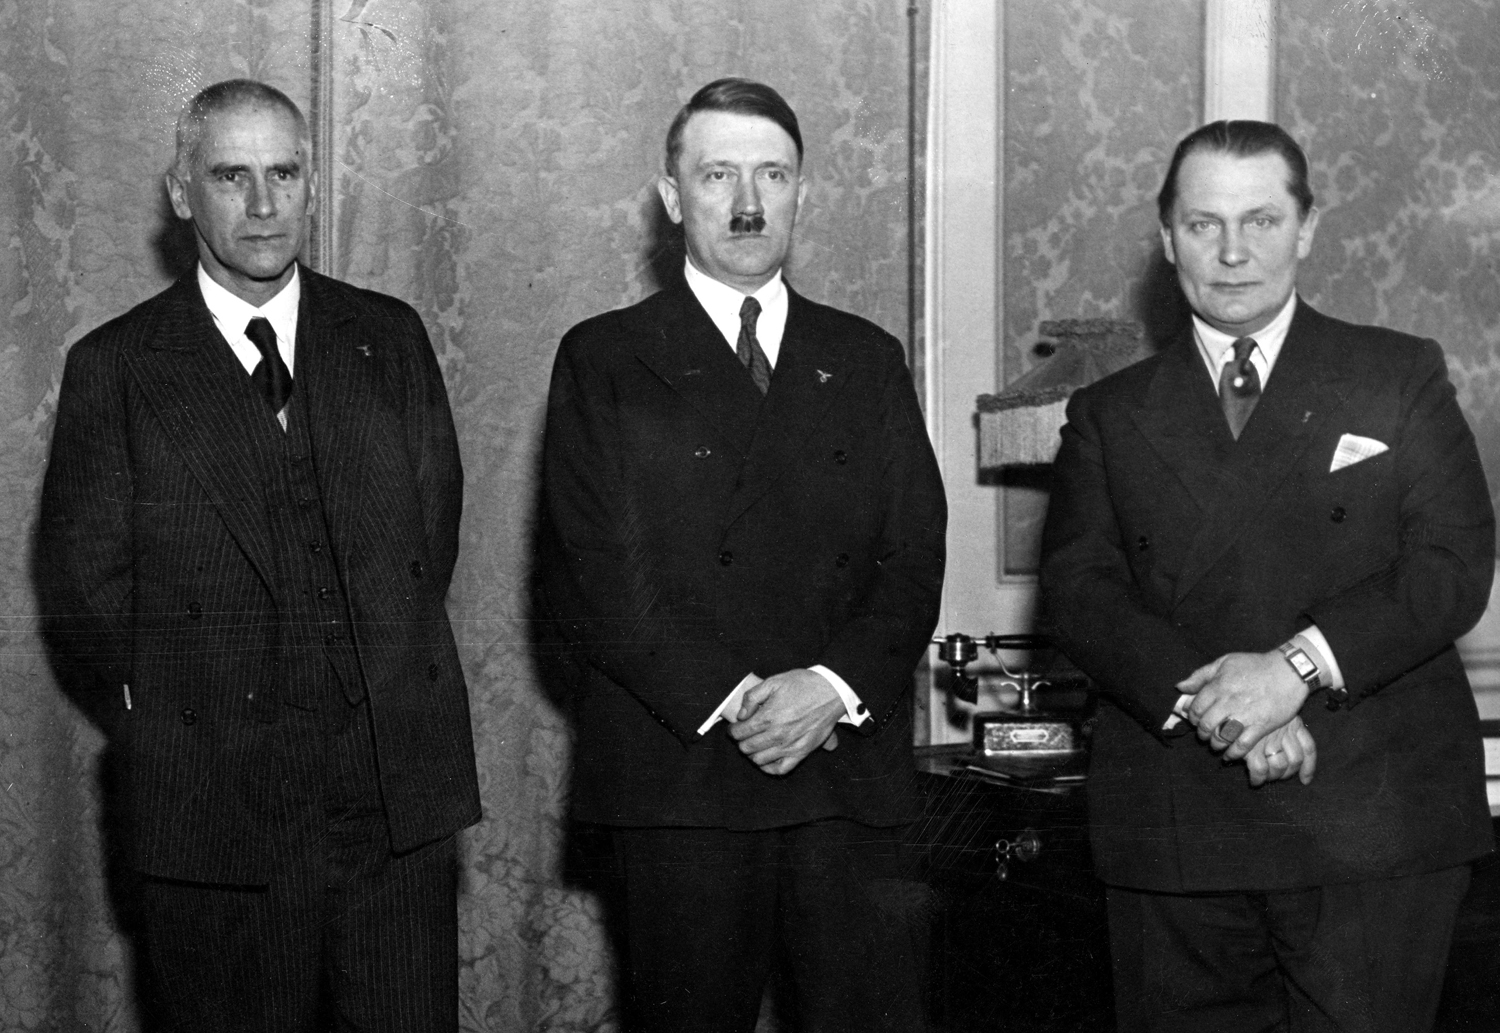 Wilhelm Frick, Hermann Göring, and Hitler on the day he was named Chancellor of Germany